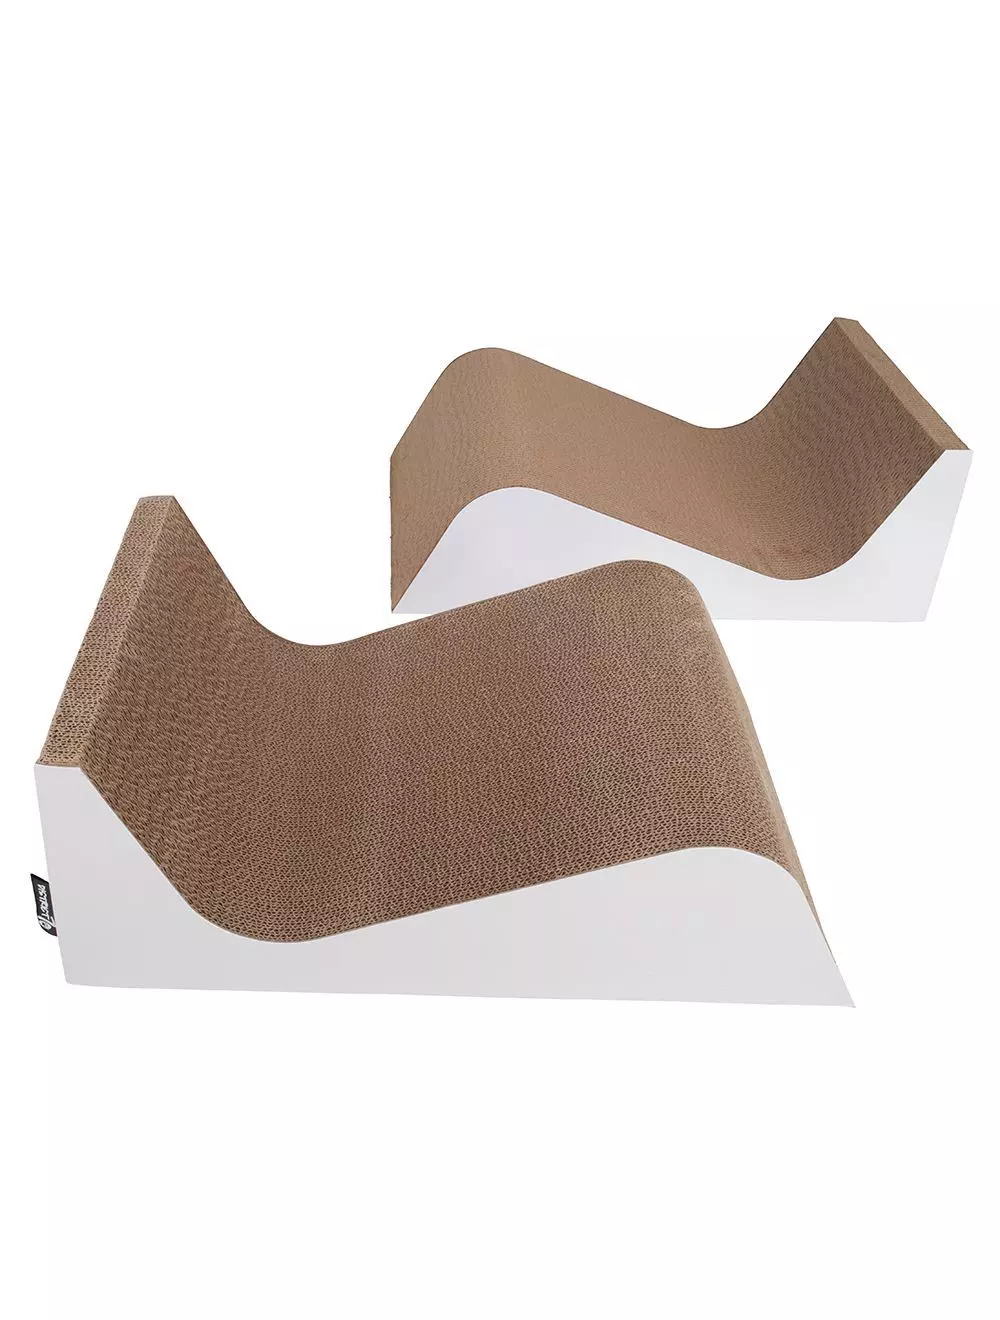 District70 Double Wave Cardboard, Large 871720261352